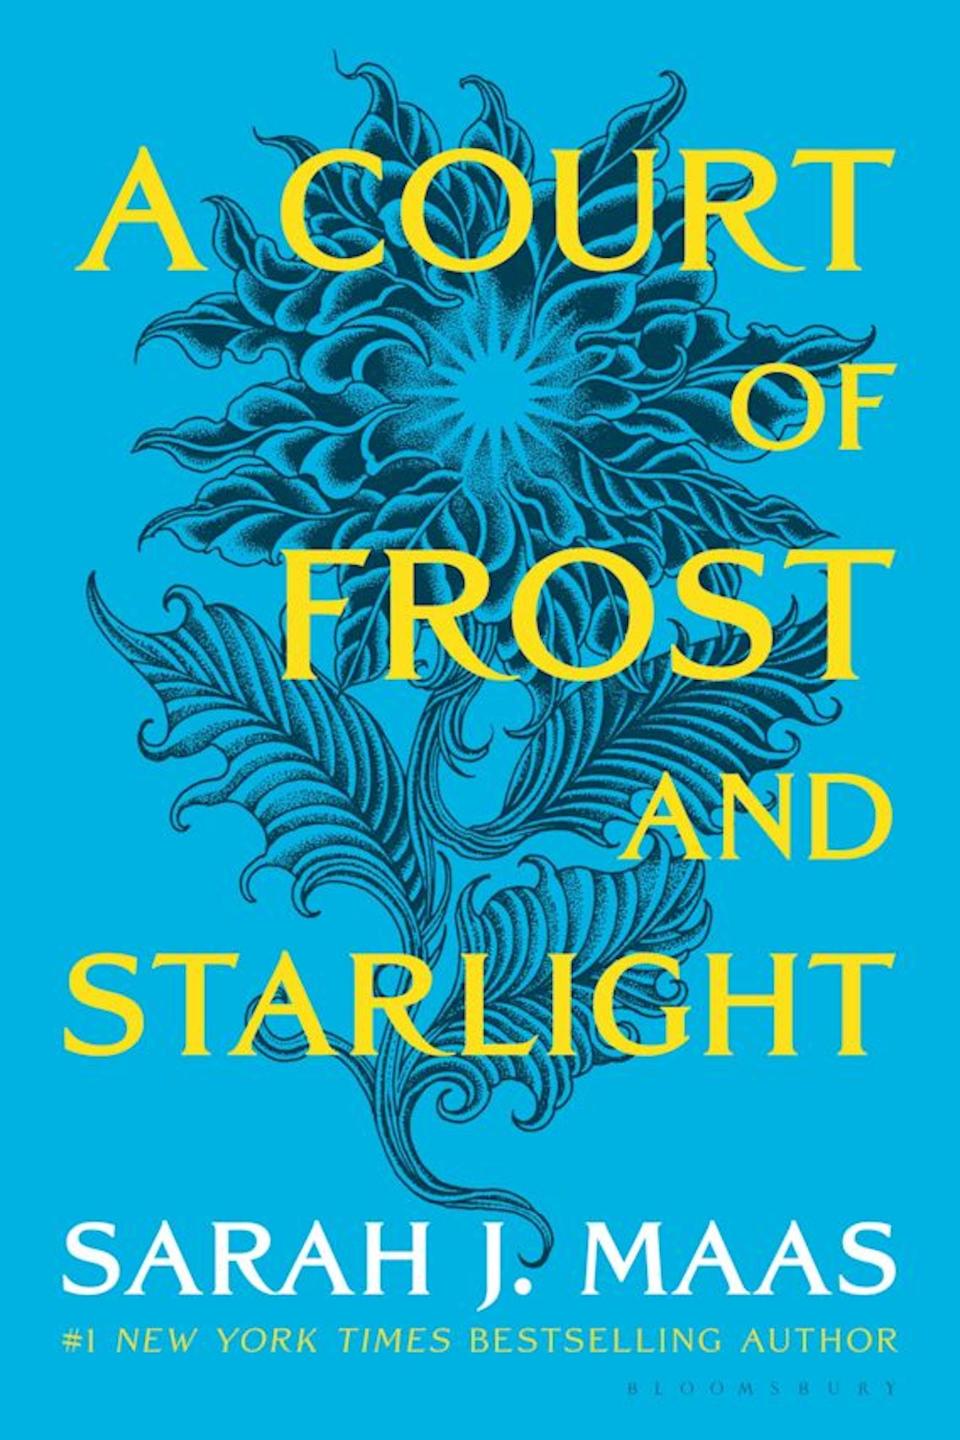 "A Court of Frost and Starlight" by Sarah J. Maas.